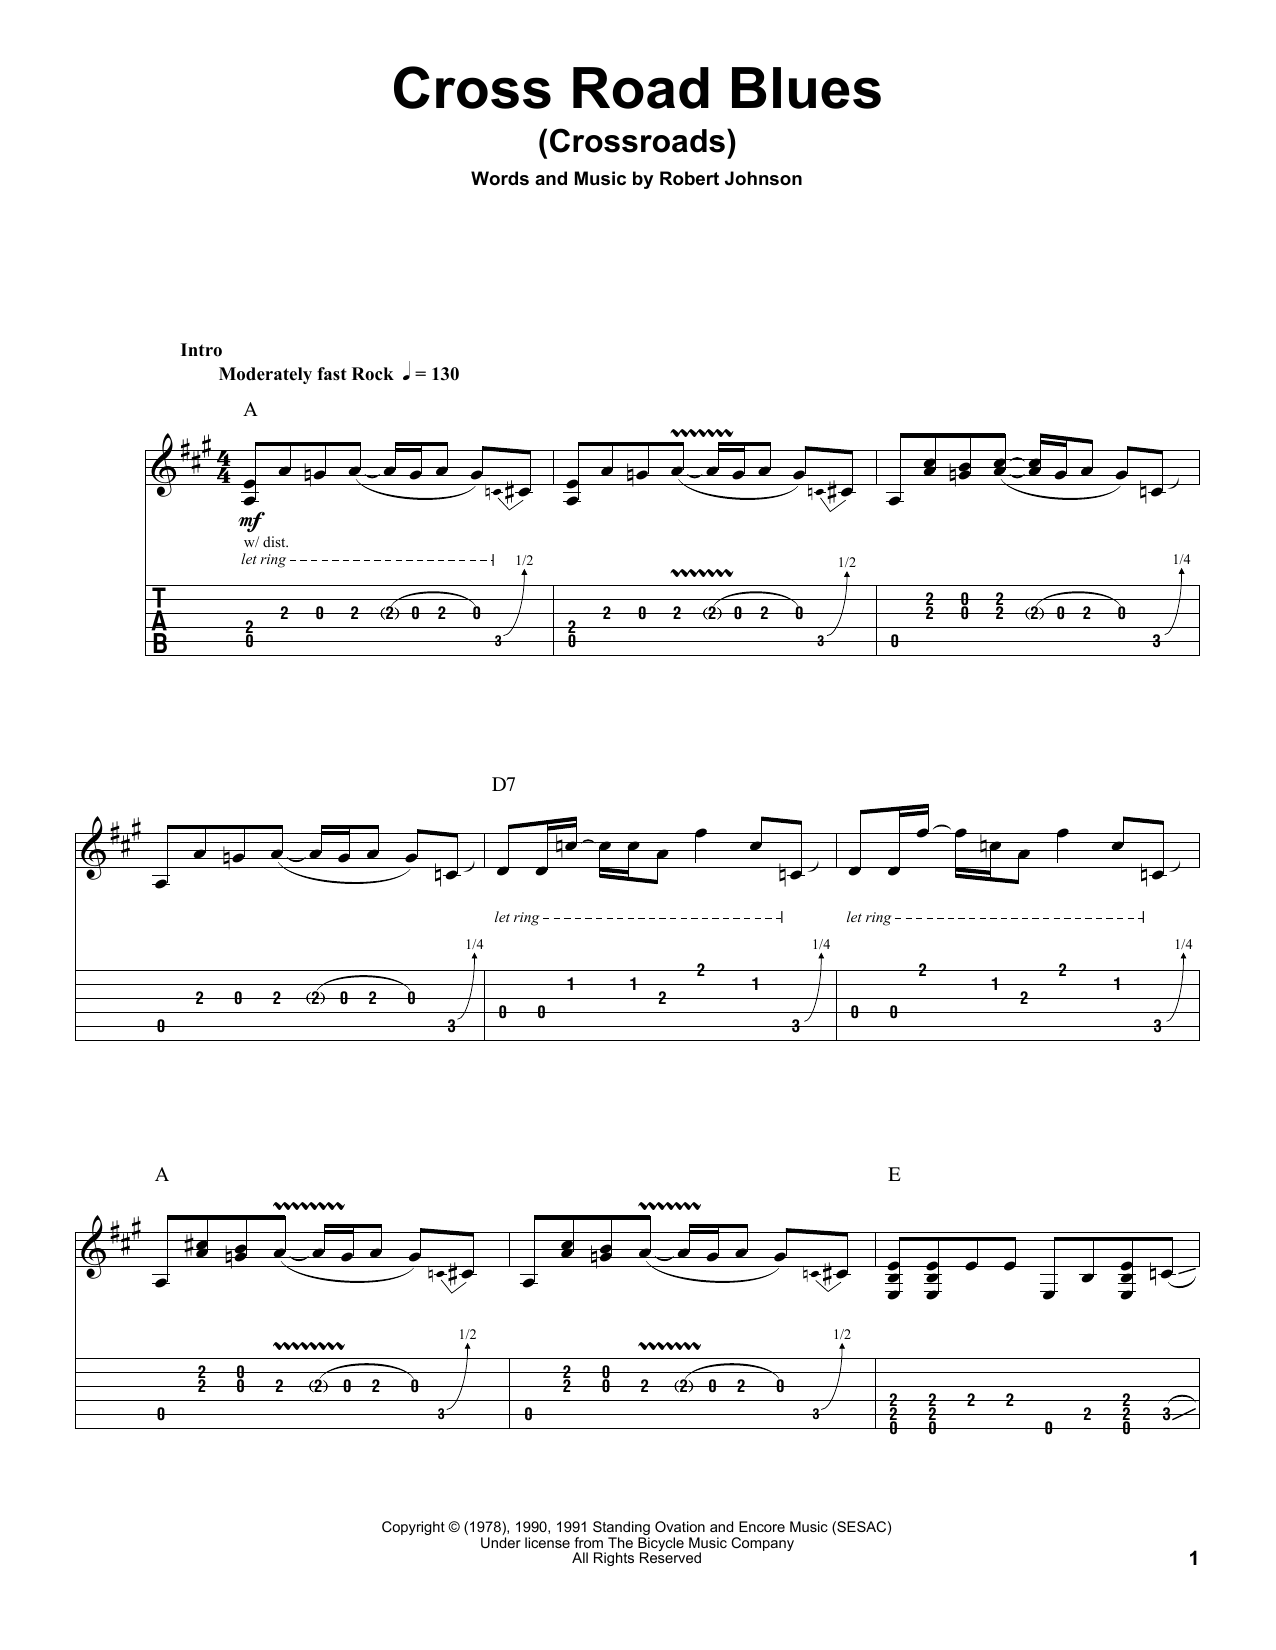 Cream Cross Road Blues (Crossroads) sheet music notes and chords. Download Printable PDF.